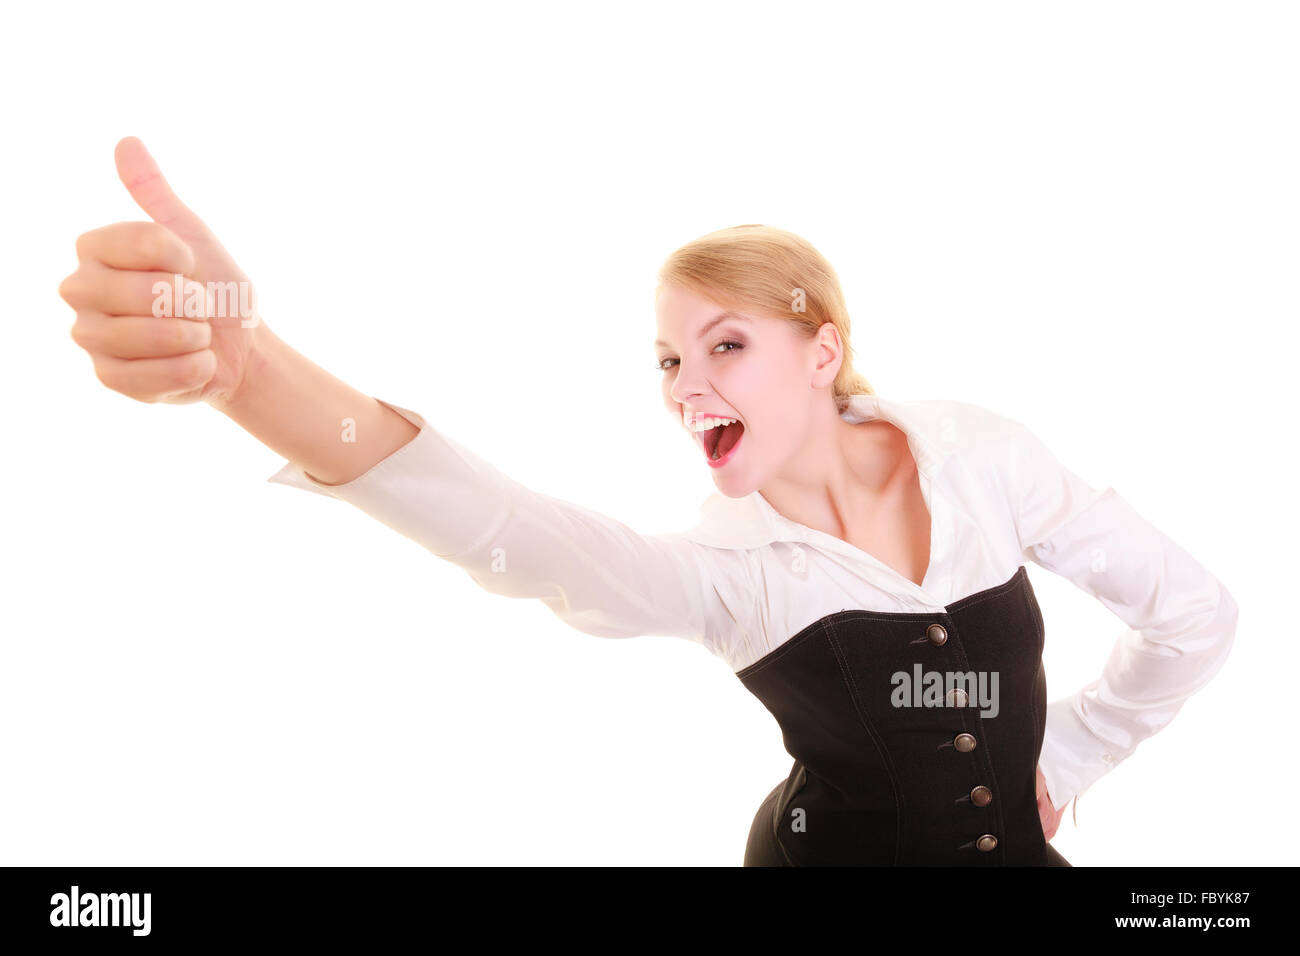 Success in work. Businesswoman celebrating promotion Stock Photo